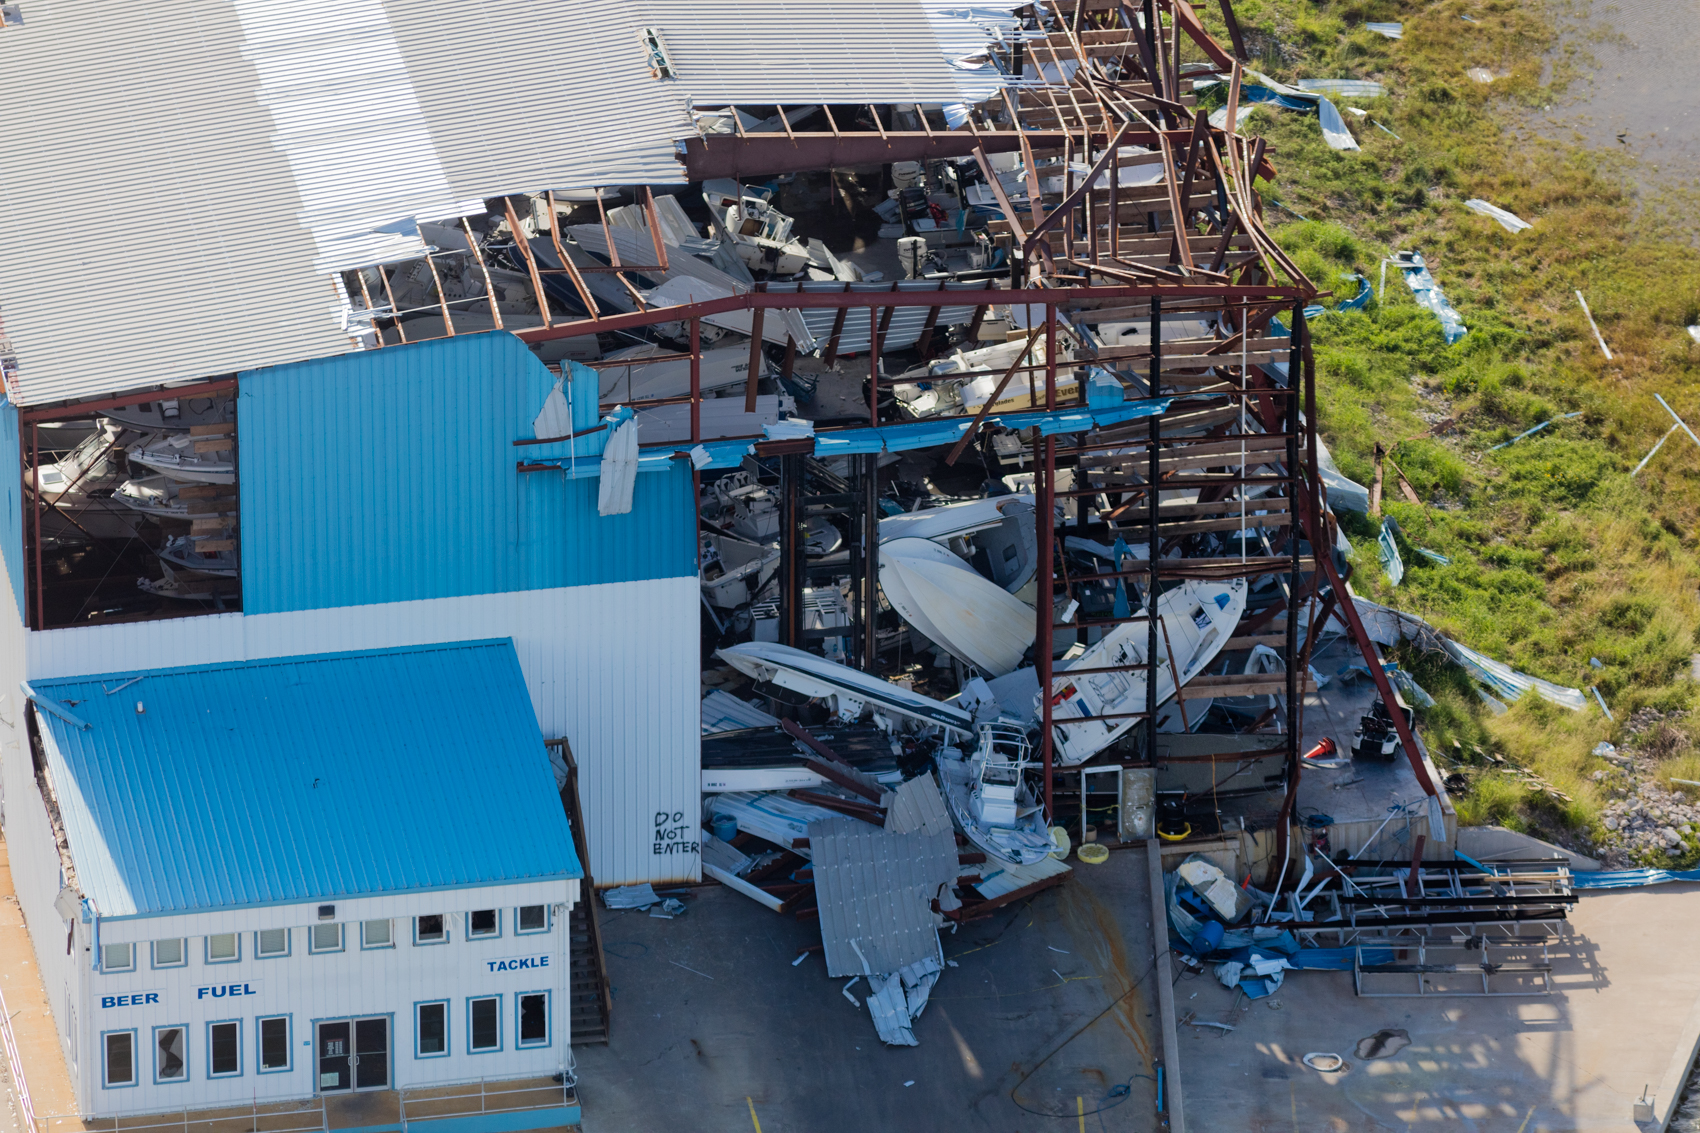 Racks storing boats at a private marina in Rockport, Texas collapsed during Hurricane Harvey.